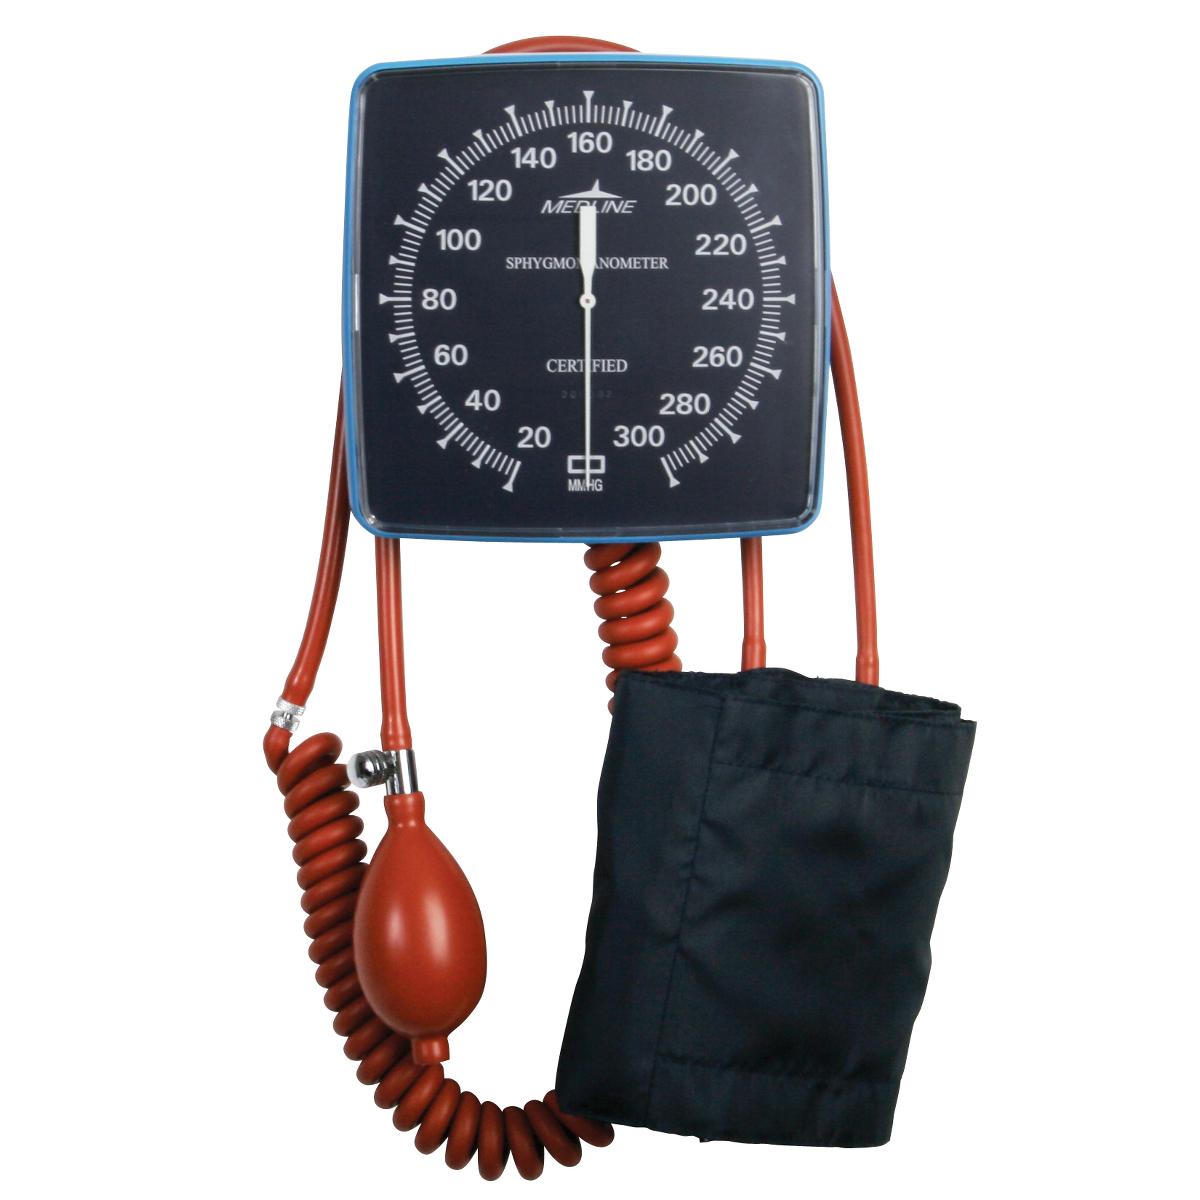 Non-Latex Wall Mount Aneroid Blood Pressure Monitor with Adult Cuff